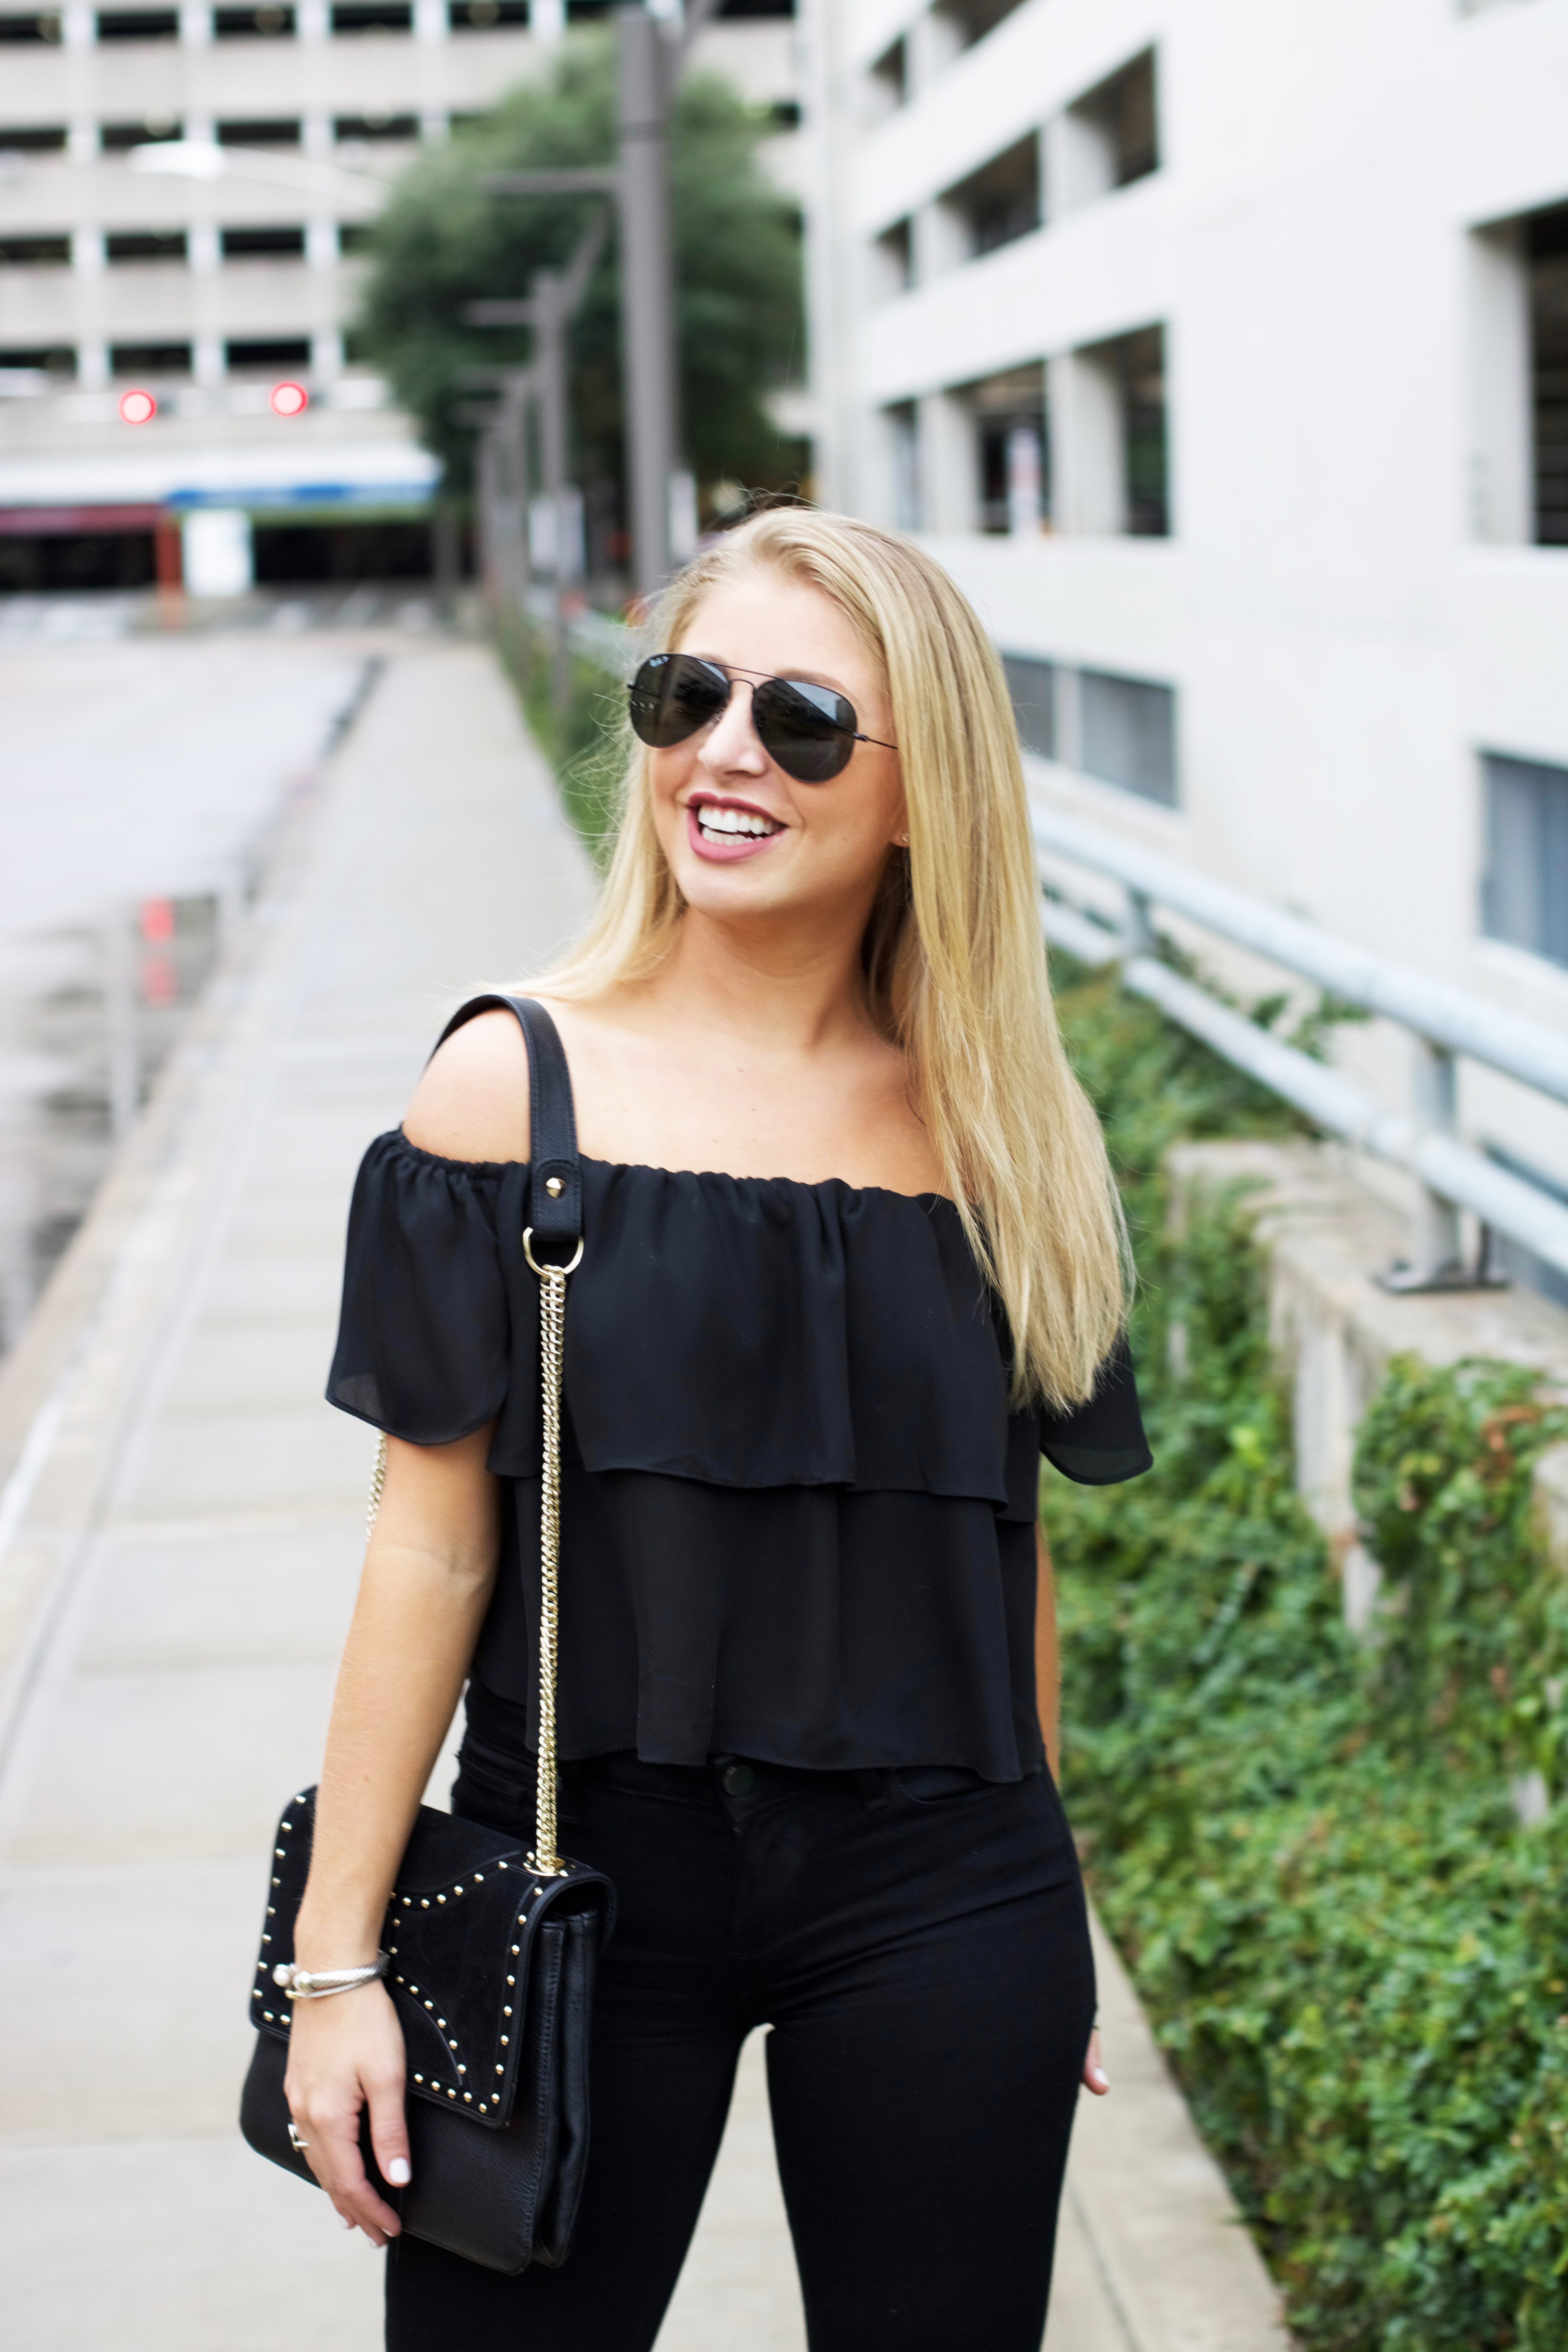 Off the shoulder fall look